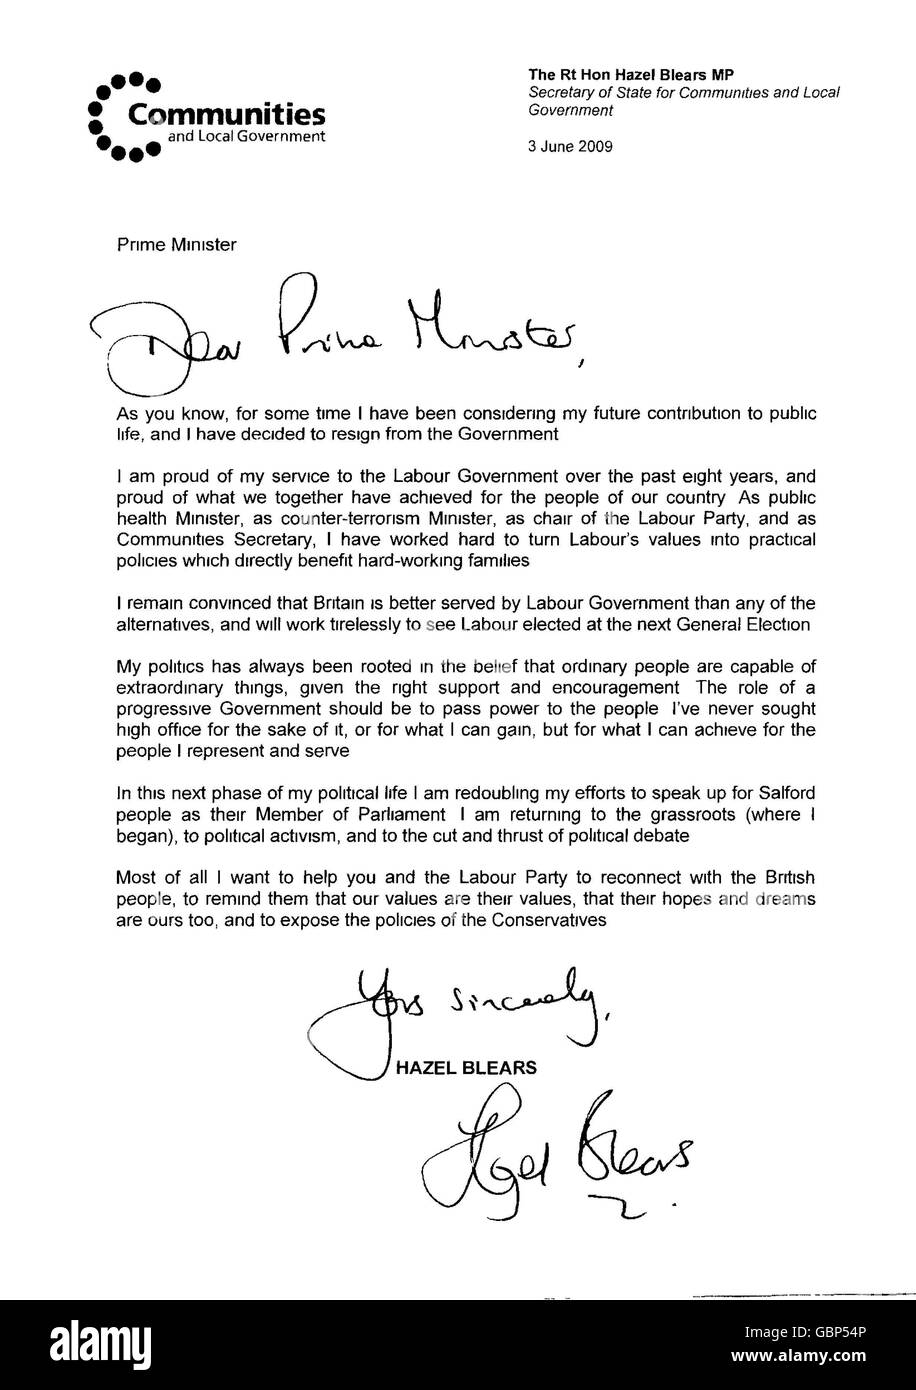 A copy of the letter sent from Communities Secretary Hazel Blears to Prime Minister Gordon Brown, informing of her decision to resign from the Cabinet. Stock Photo